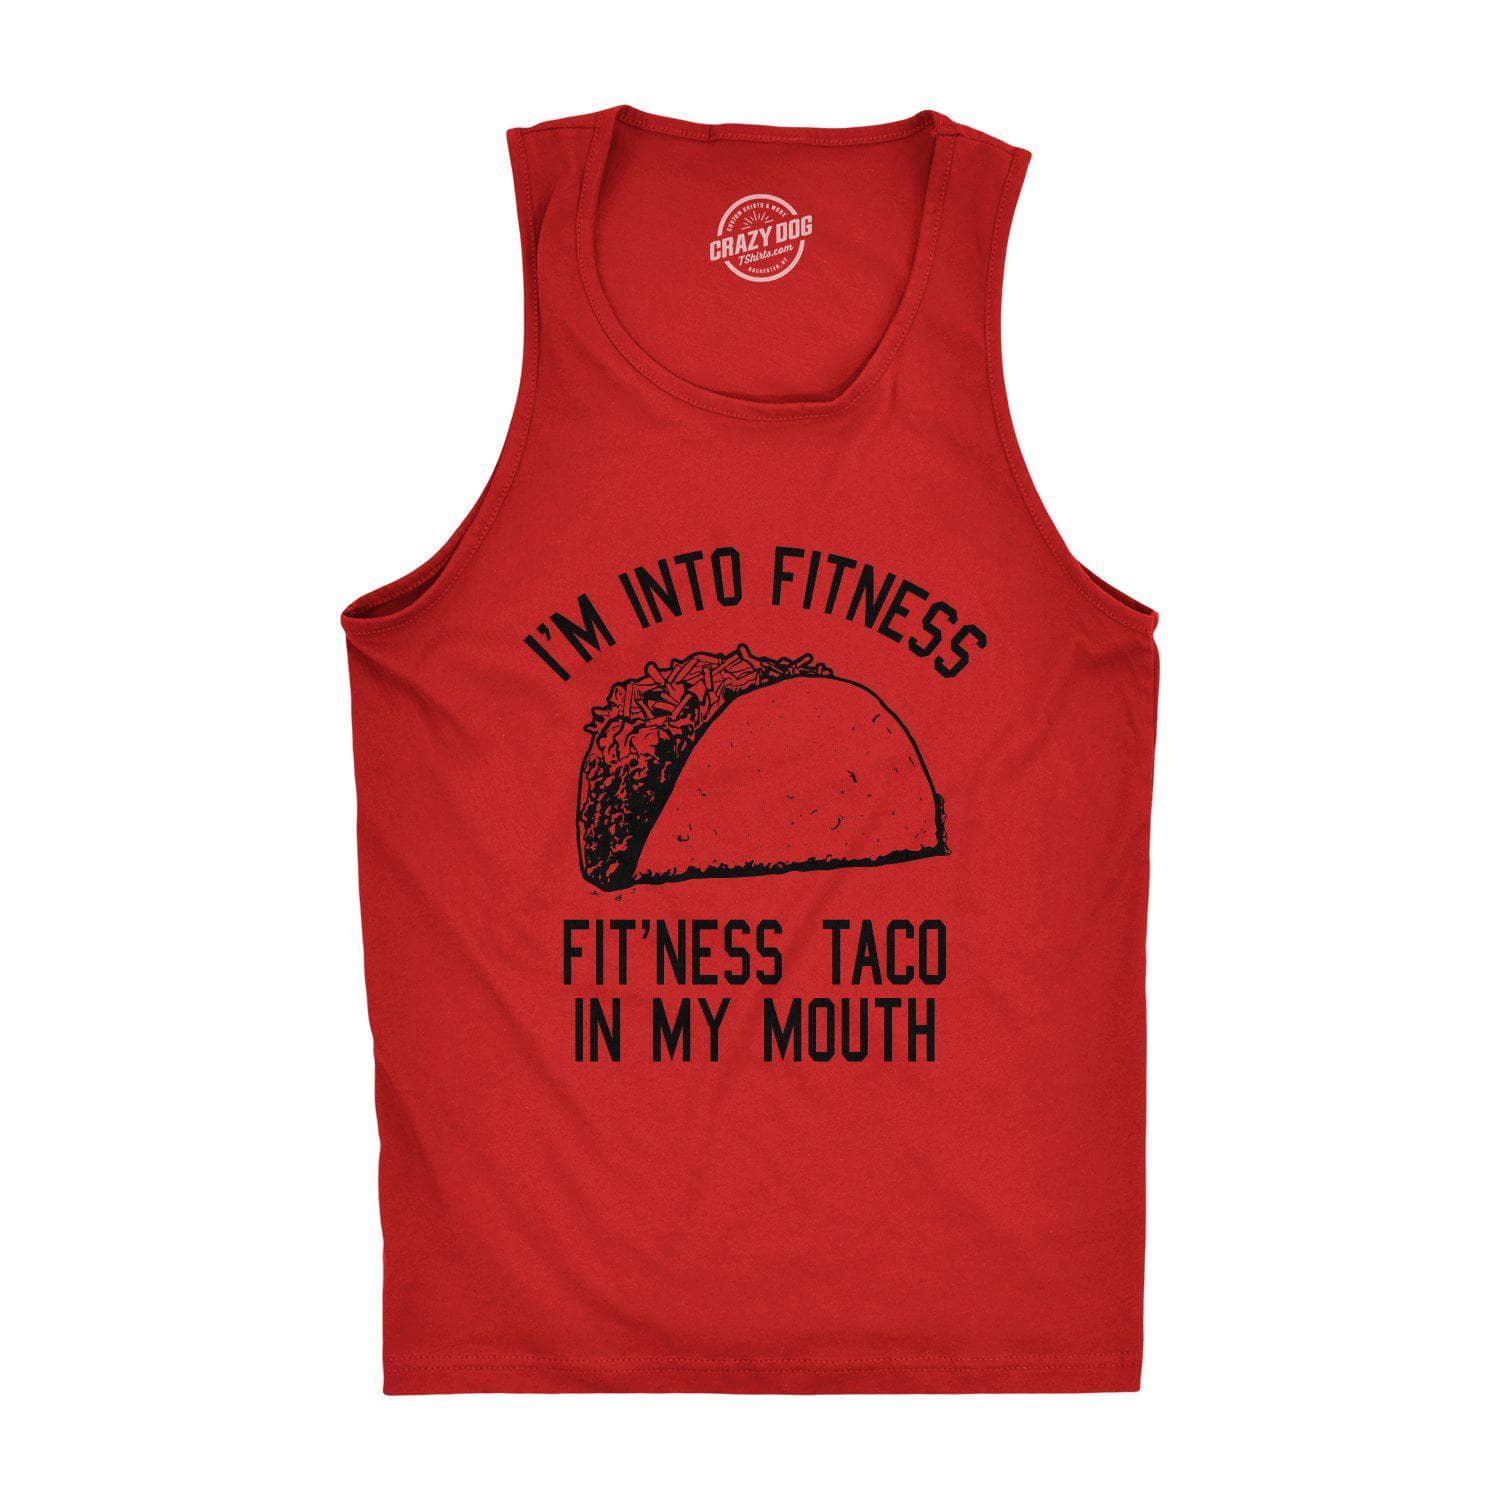 I'm Into Fitness Fit'ness Taco In My Mouth Men's Tank Top  -  Crazy Dog T-Shirts